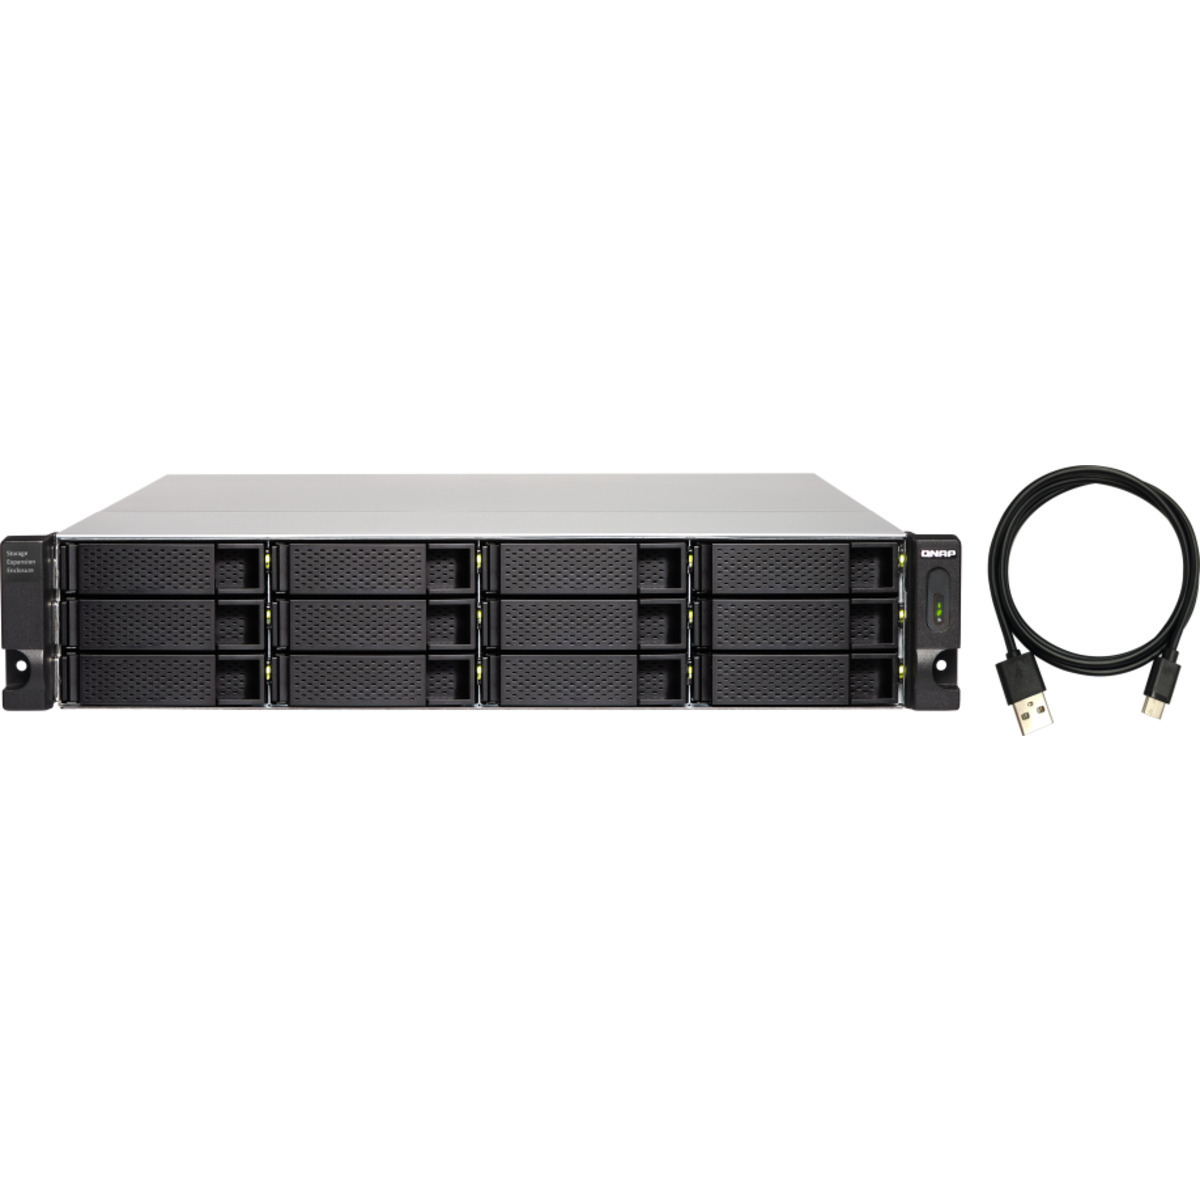 buy QNAP TL-R1200C-RP External Expansion Drive 48tb RackMount Expansion Enclosure 12x4000gb Samsung 870 EVO MZ-77E4T0BAM 2.5 560/530MB/s SATA 6Gb/s SSD CONSUMER Class Drives Installed - Burn-In Tested - nas headquarters buy network attached storage server device das new raid-5 free shipping simply usa TL-R1200C-RP External Expansion Drive